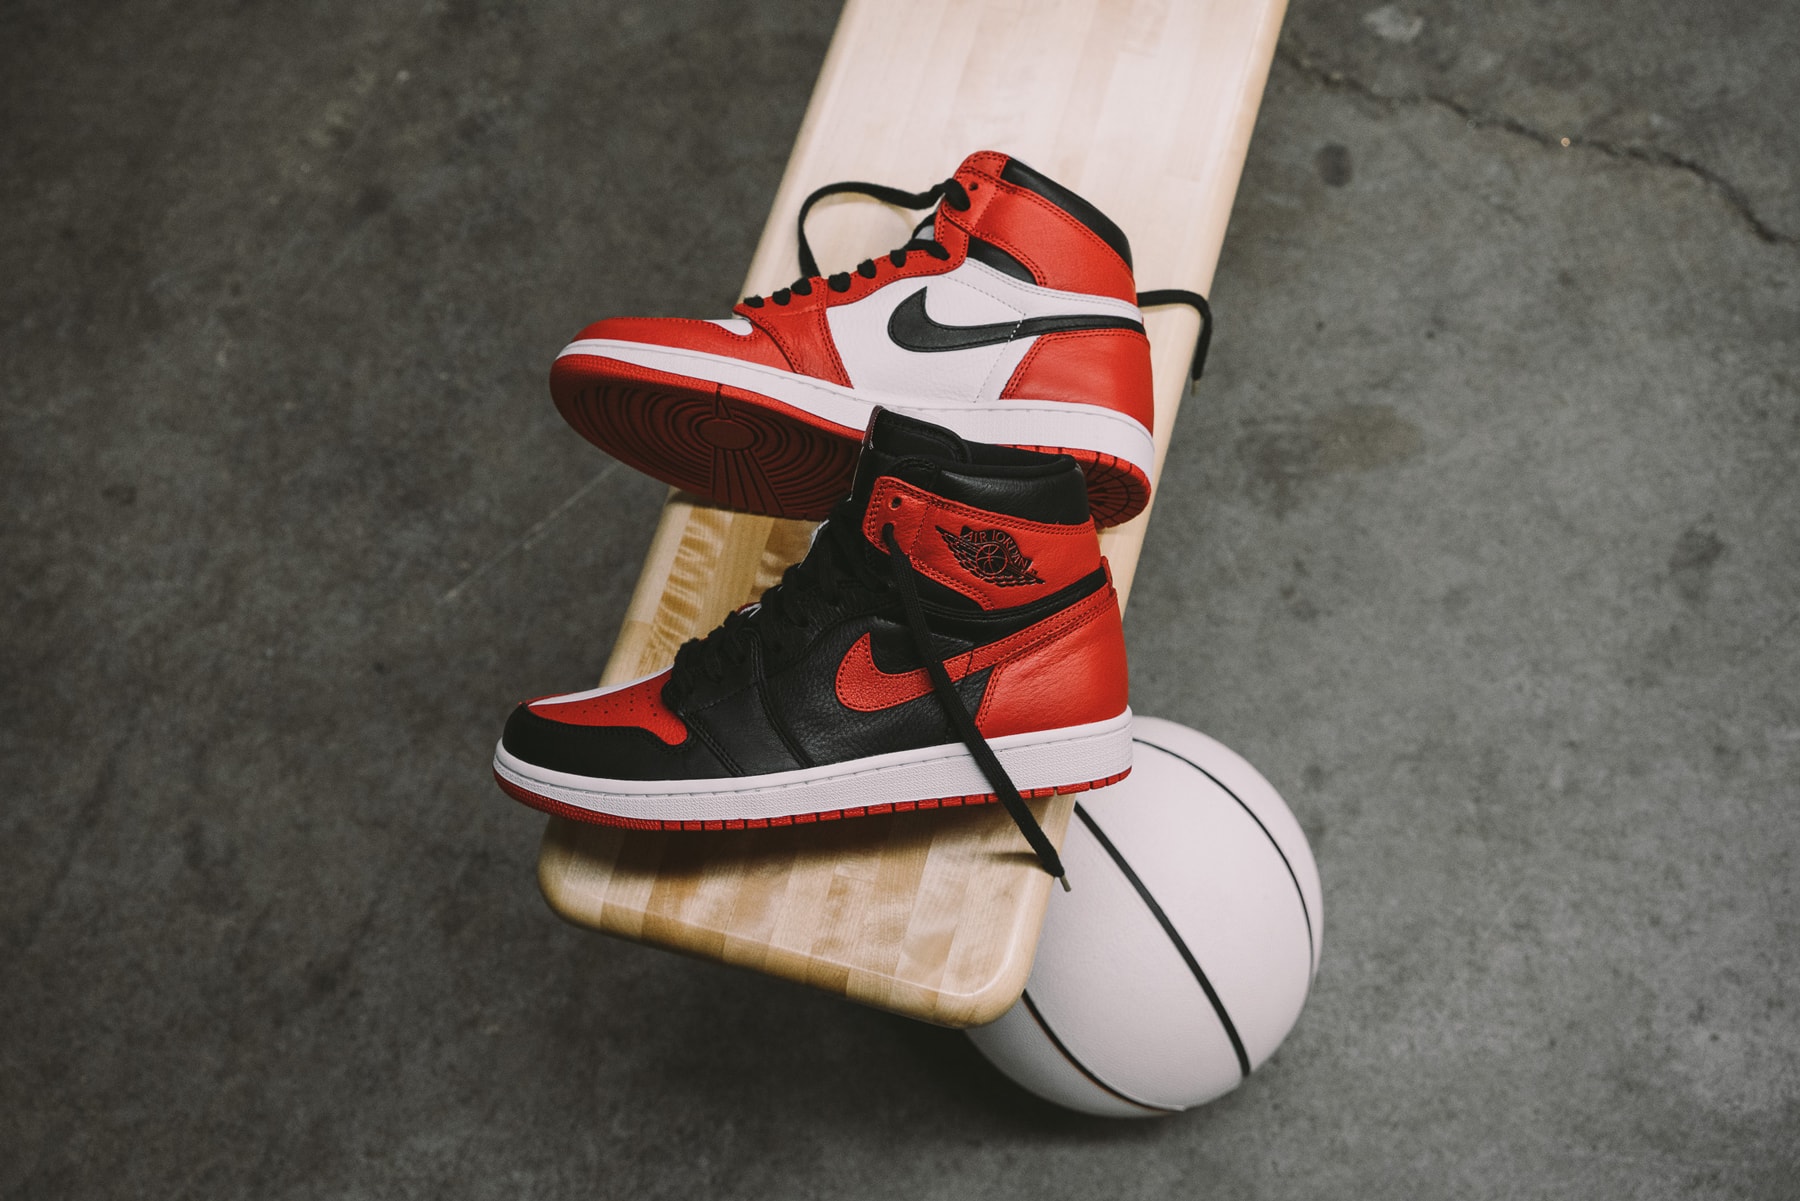 Air Jordan 1 Homage to Home 2,300 Pair Limited Release First Issue Version